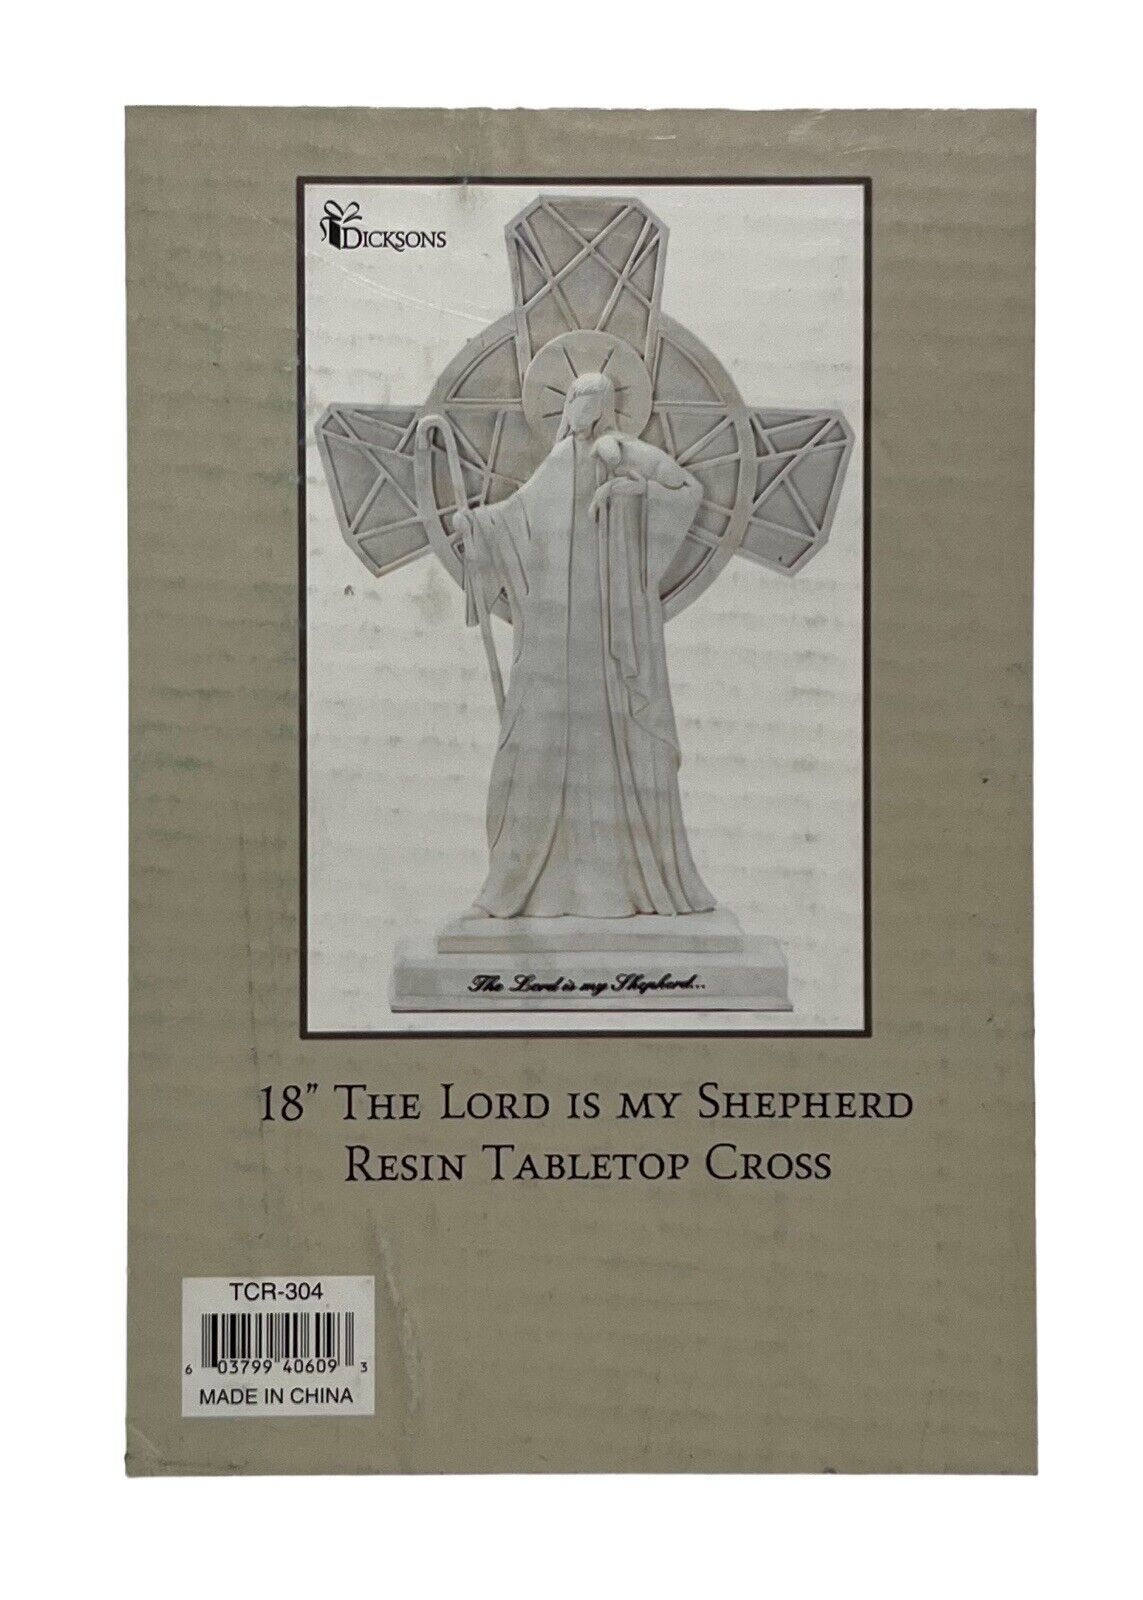 Dicksons Resin Tabletop Cross White The Lord is My Shepherd 18 Inch  Damaged Box